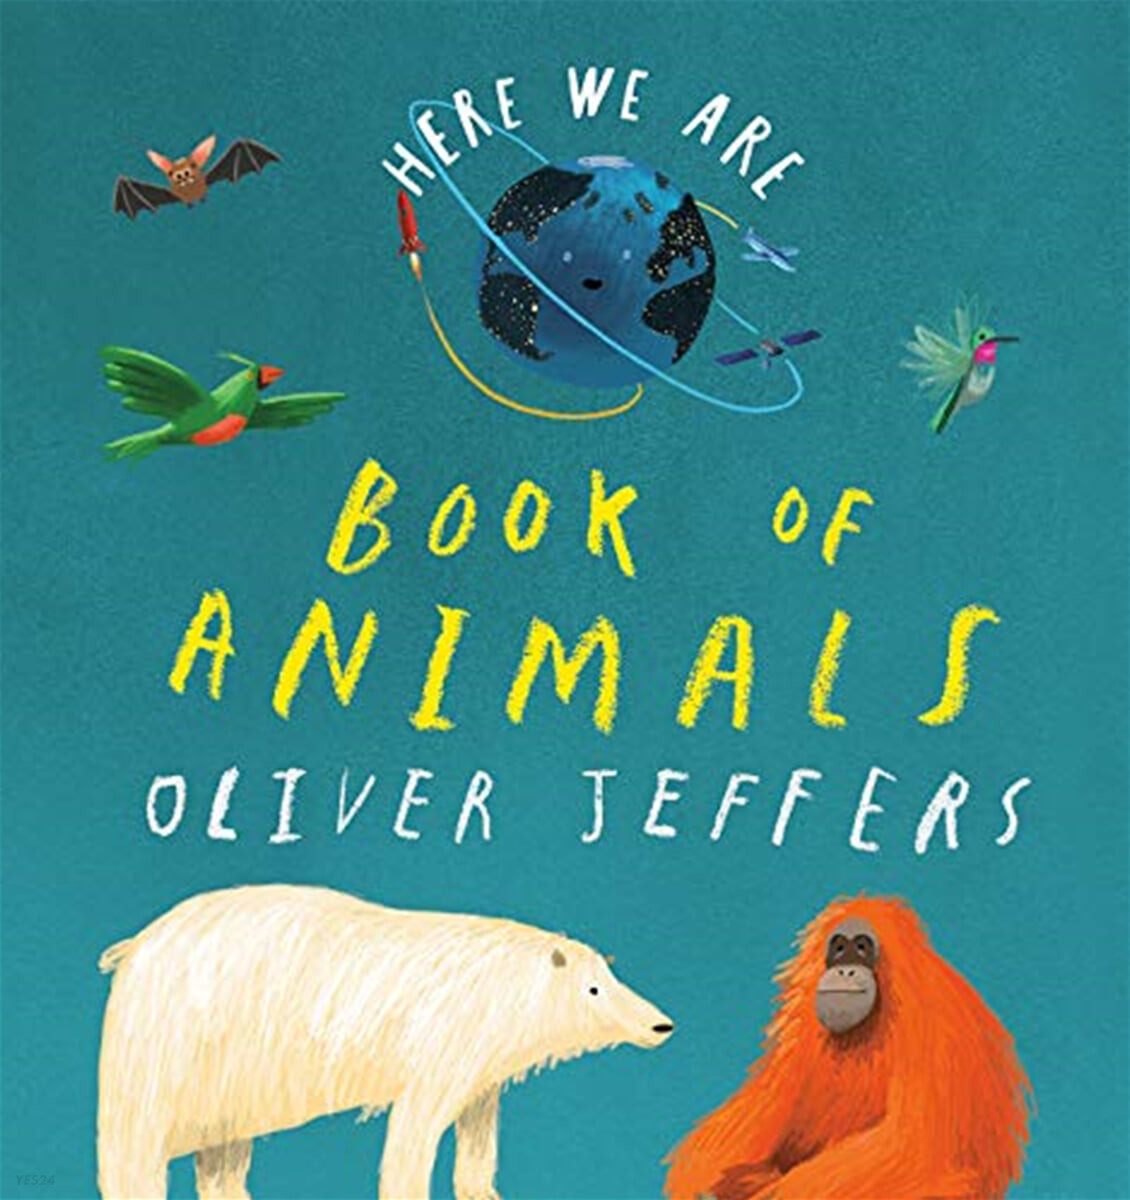 Here we are. [1], Book of Animals